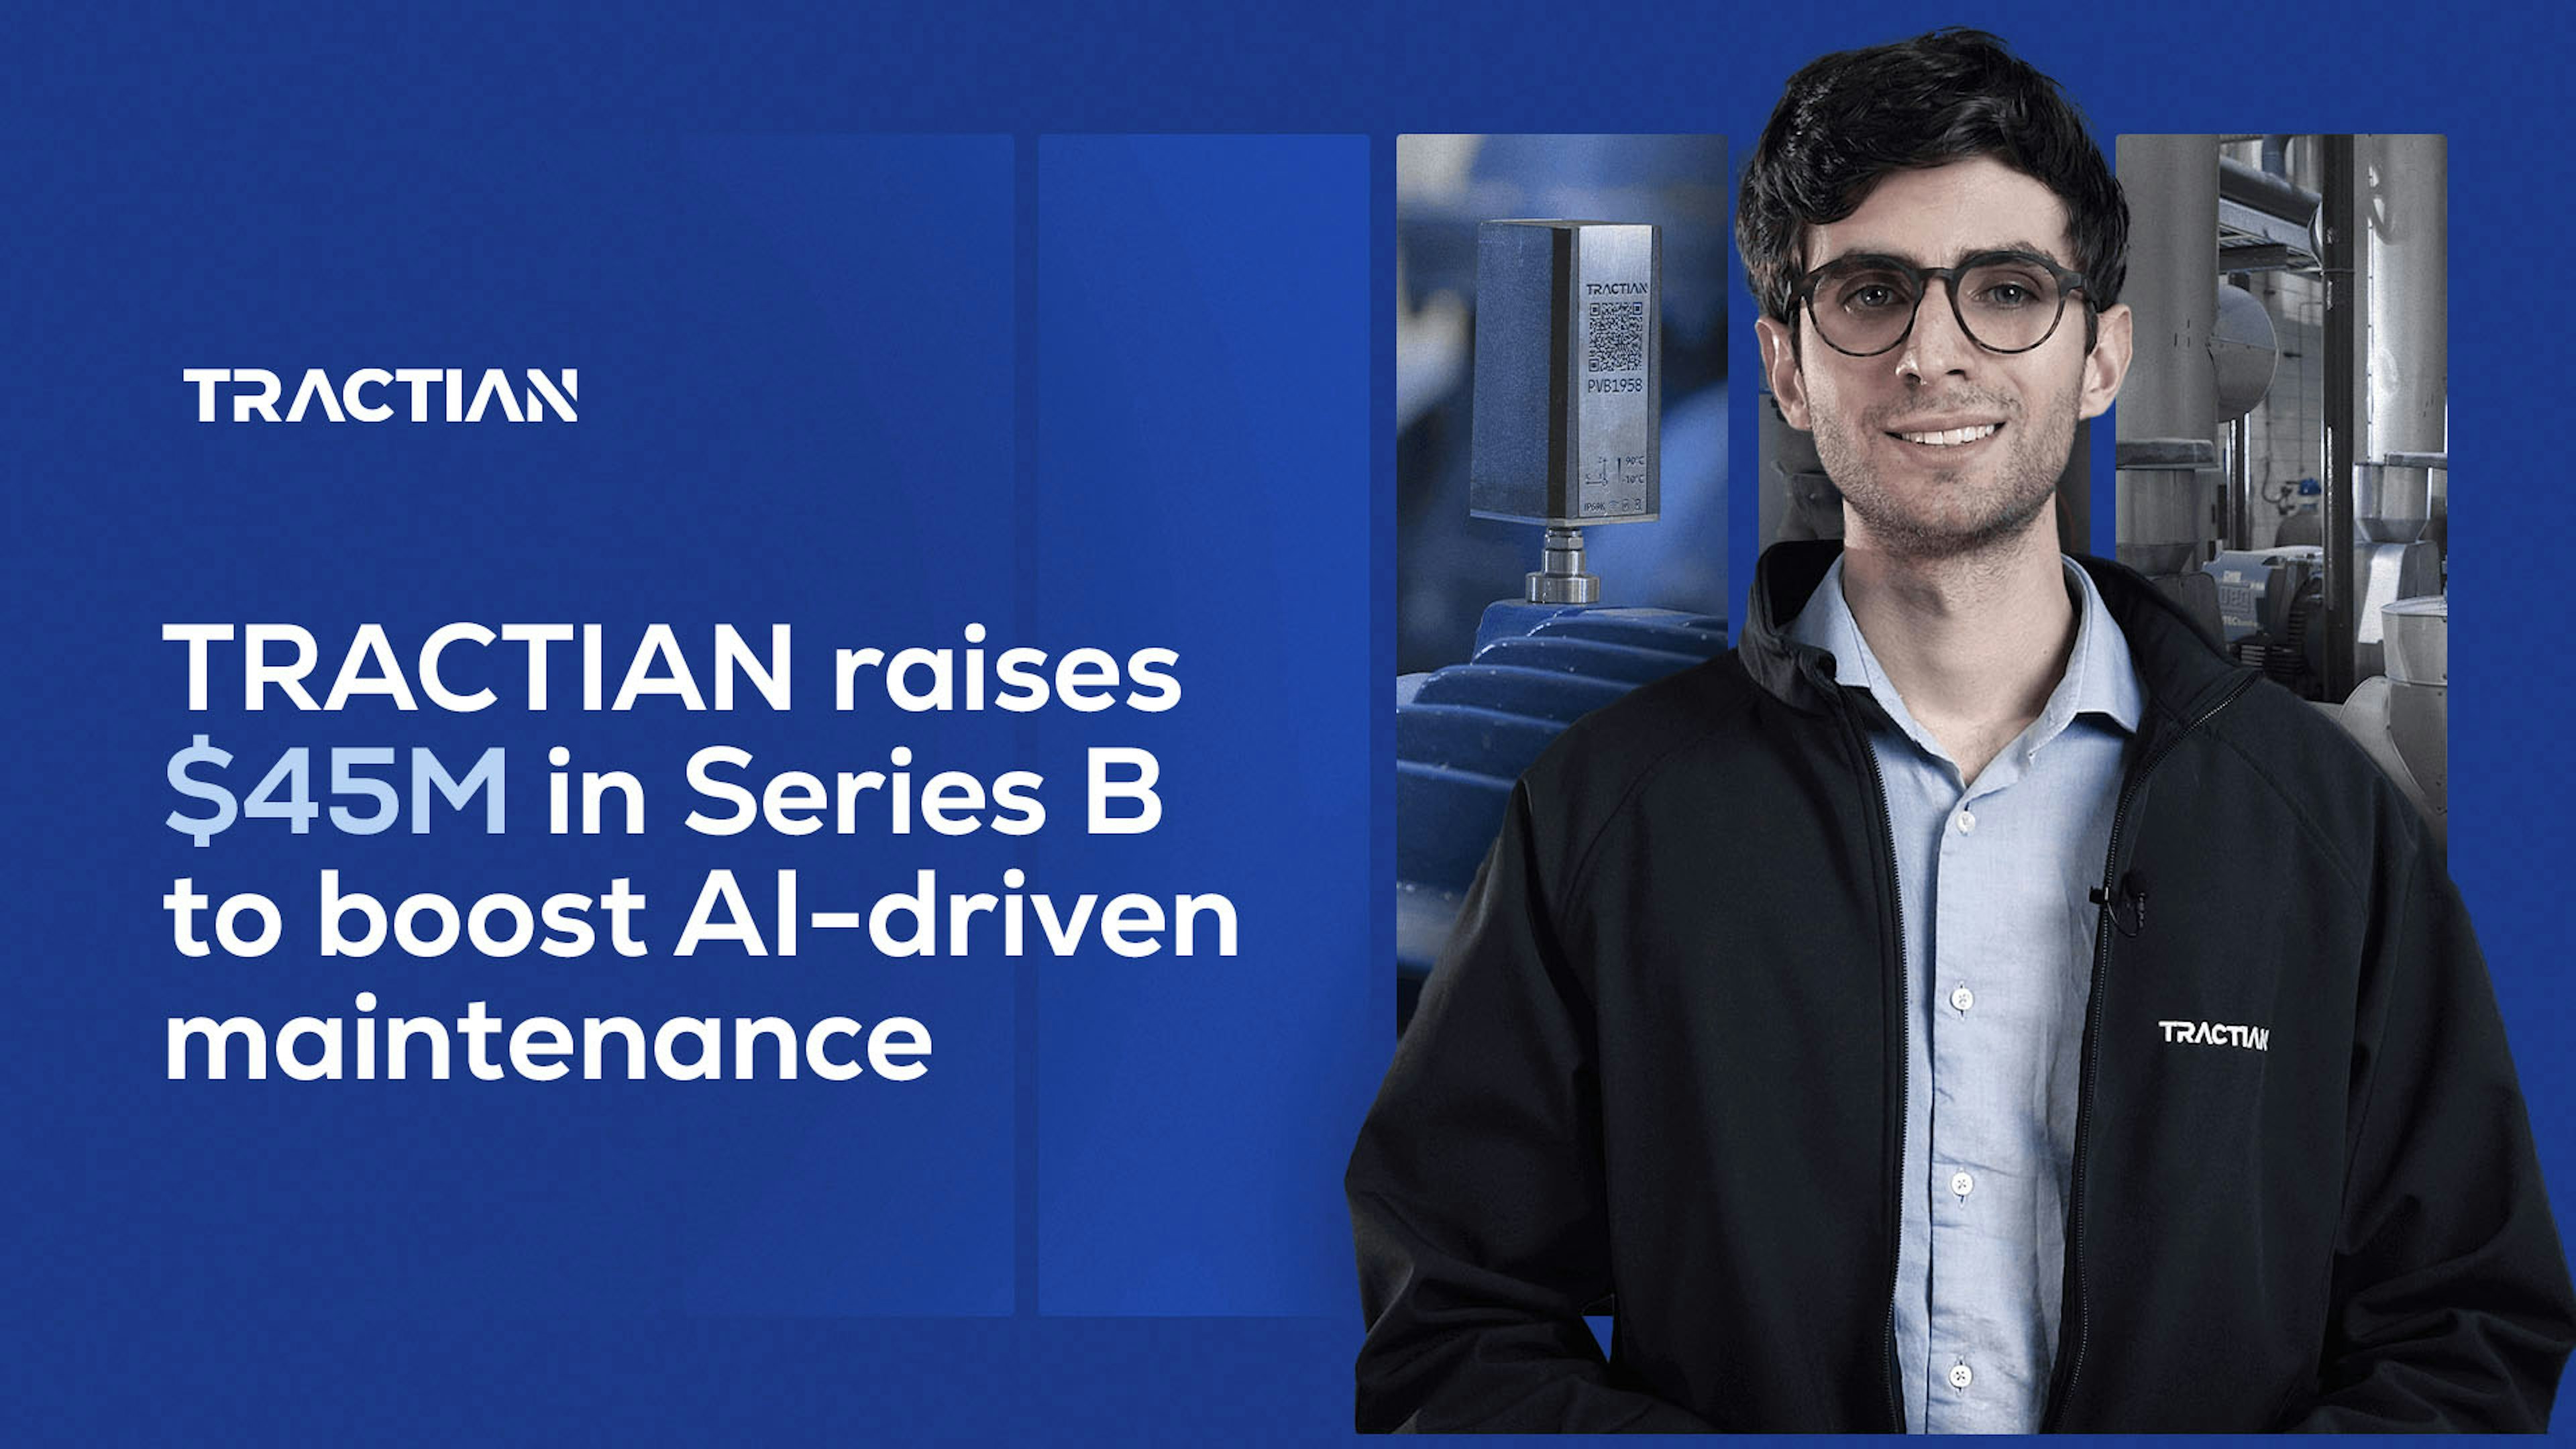 Tractian's new $45M Series B Funding Boosts AI-driven Maintenance Operations